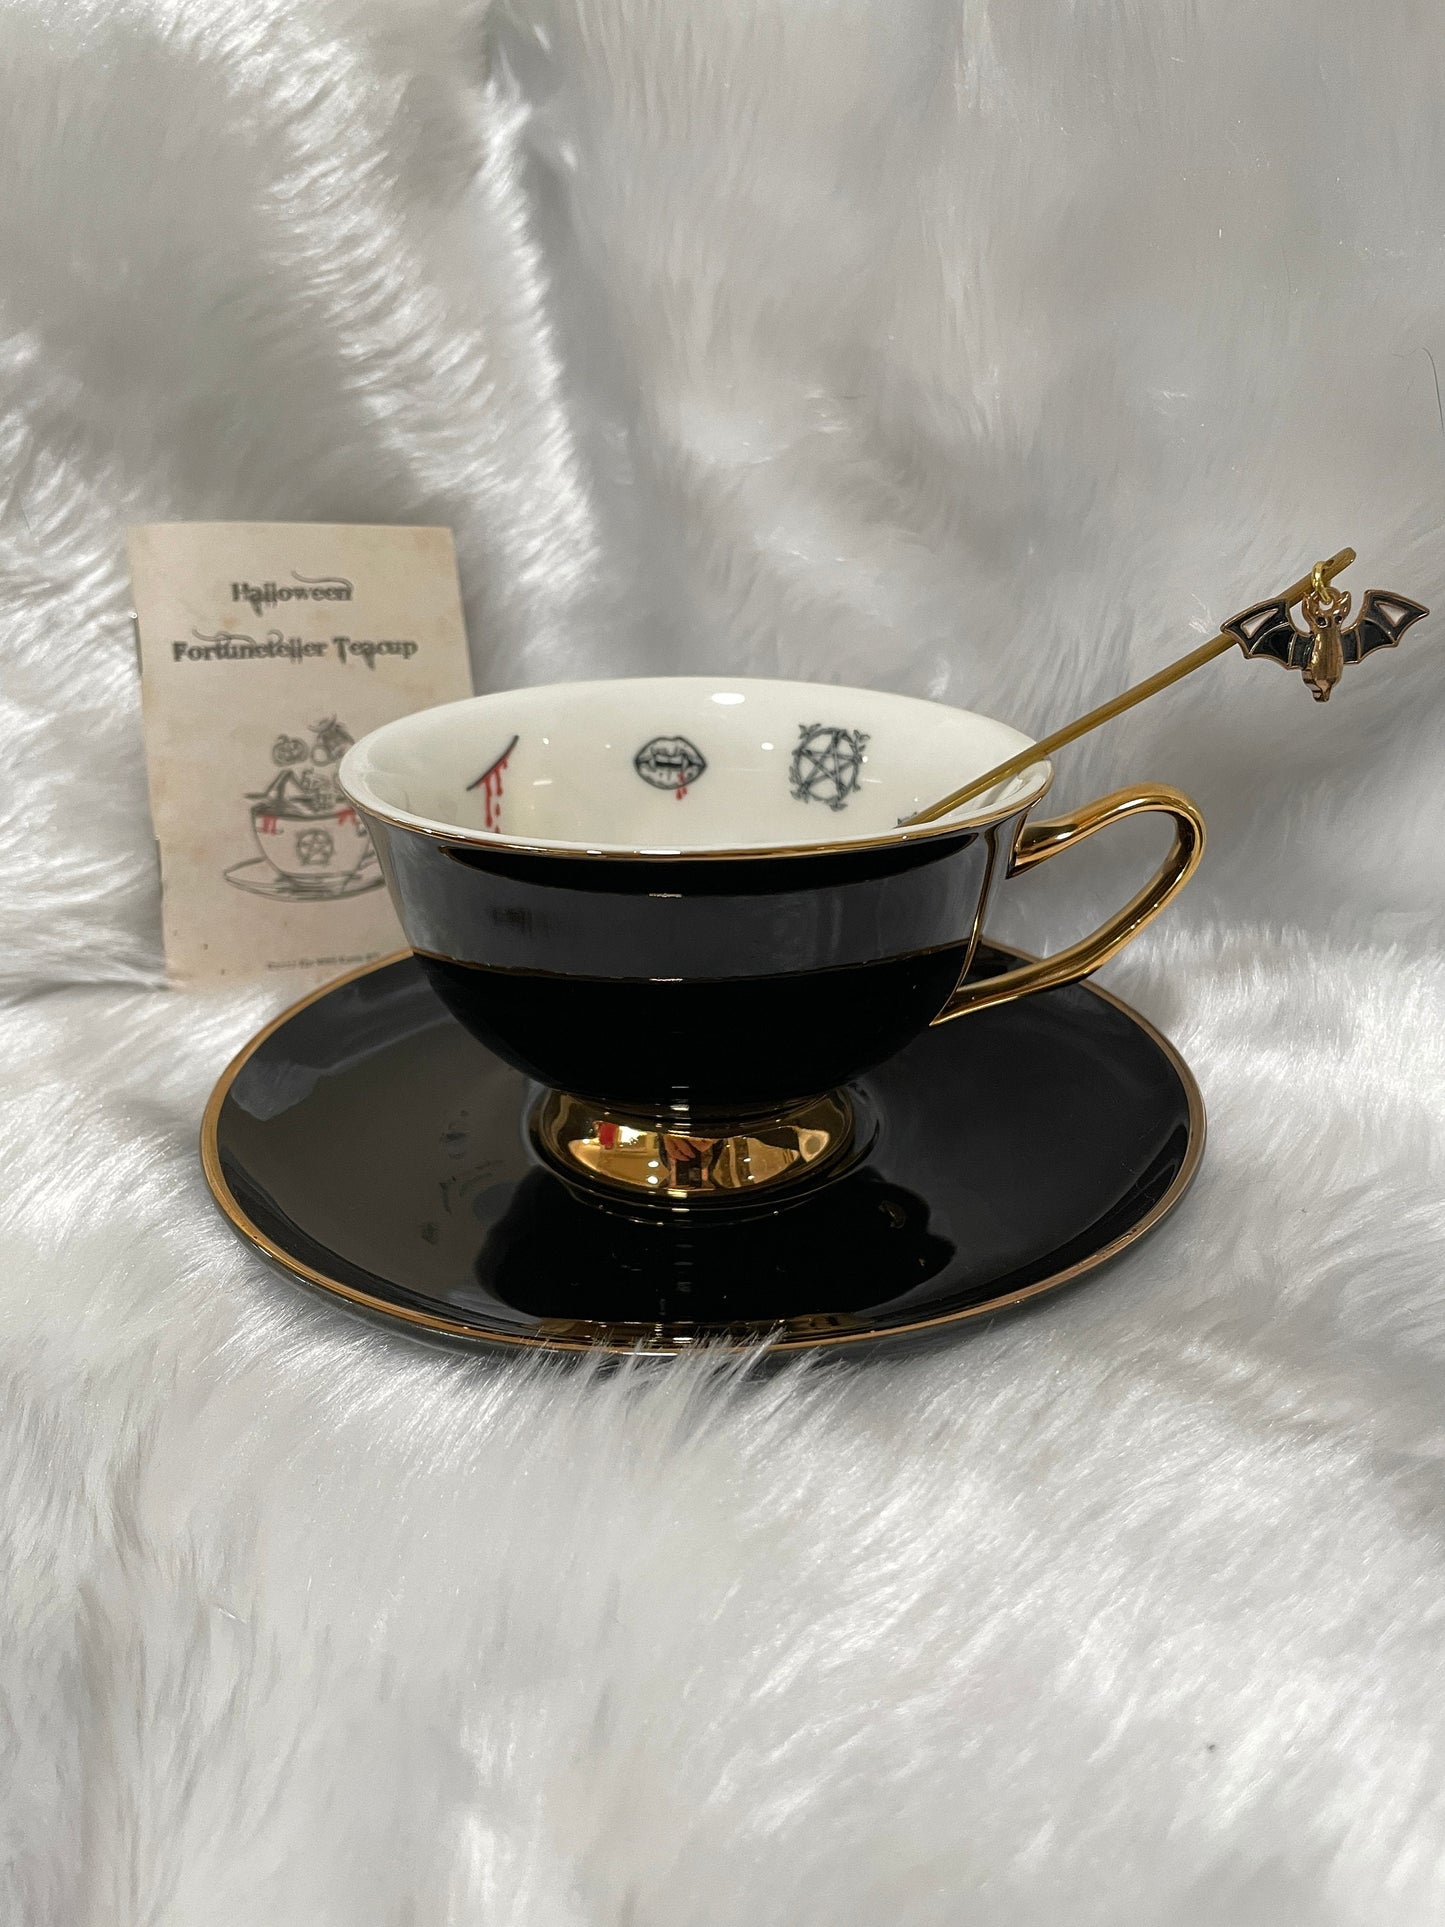 Halloween Gift, Halloween Coffee Tea Cup, Fortune Teller Teacup, Black Tea Cup, Gothic Gift For Her, Witchy Witch, Halloween Party.